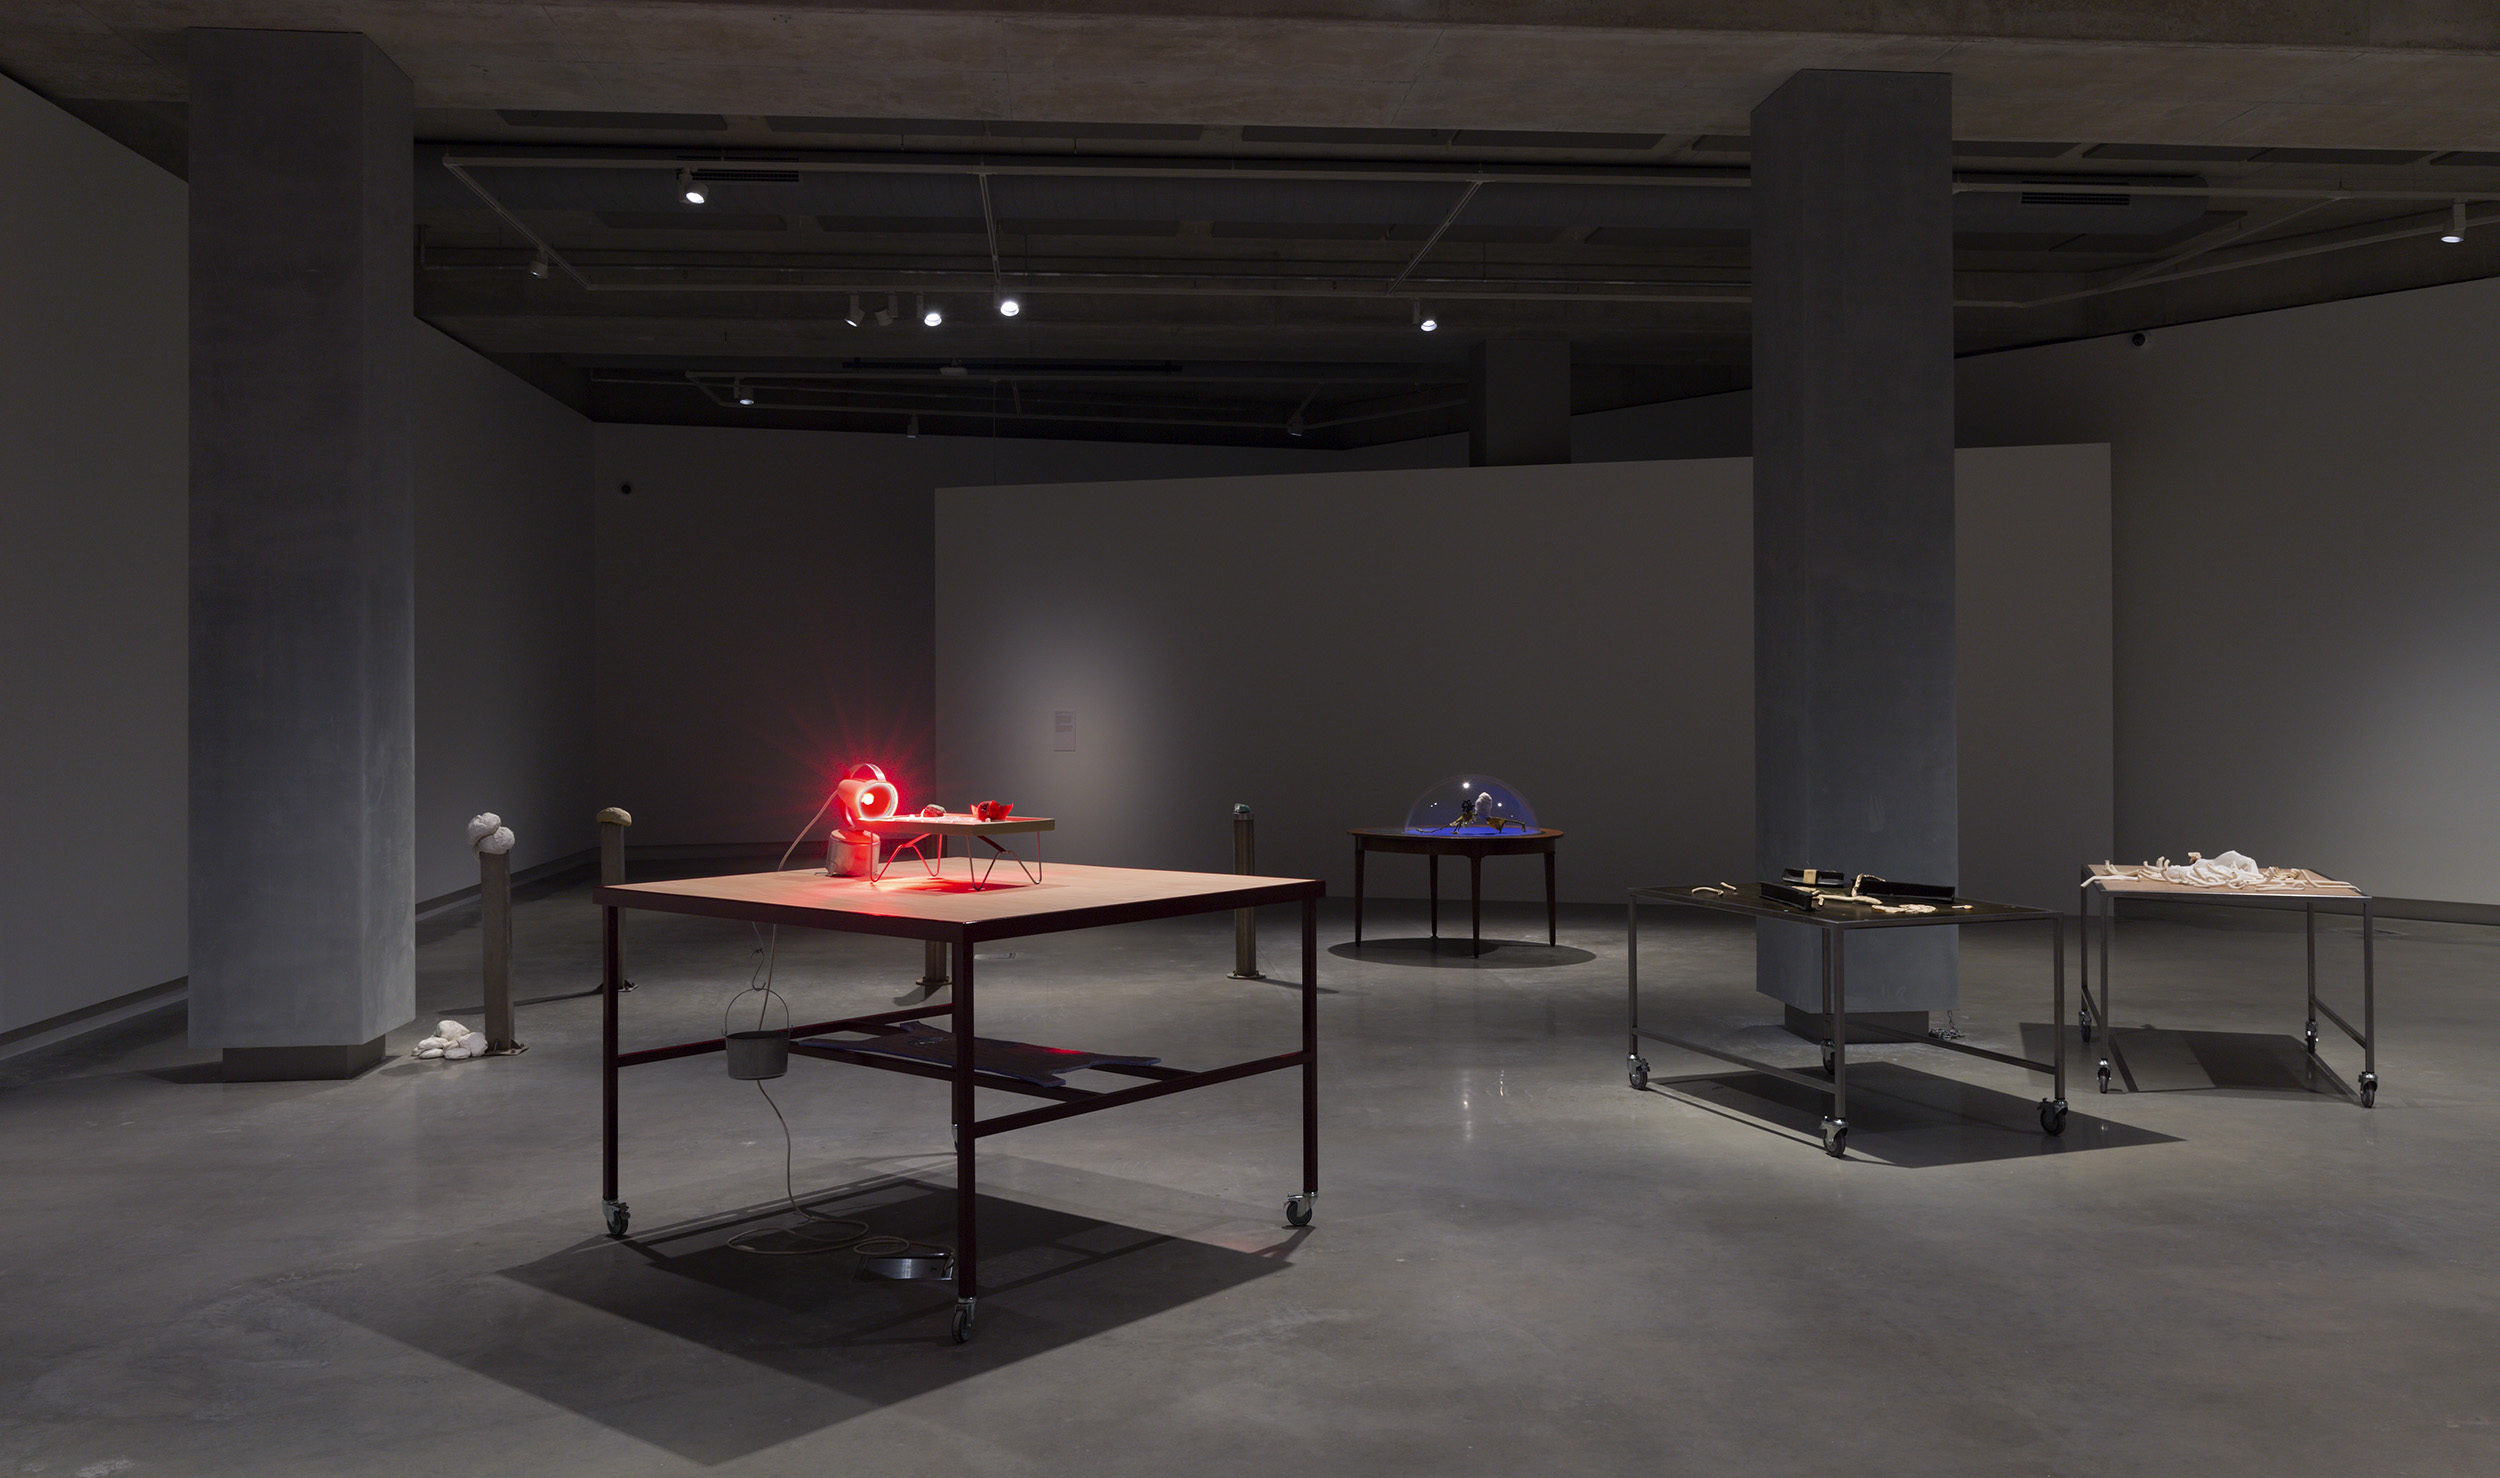 Installation view, Susan Jacobs, The Ants are in the Idiom. Photography Christian Capurro.